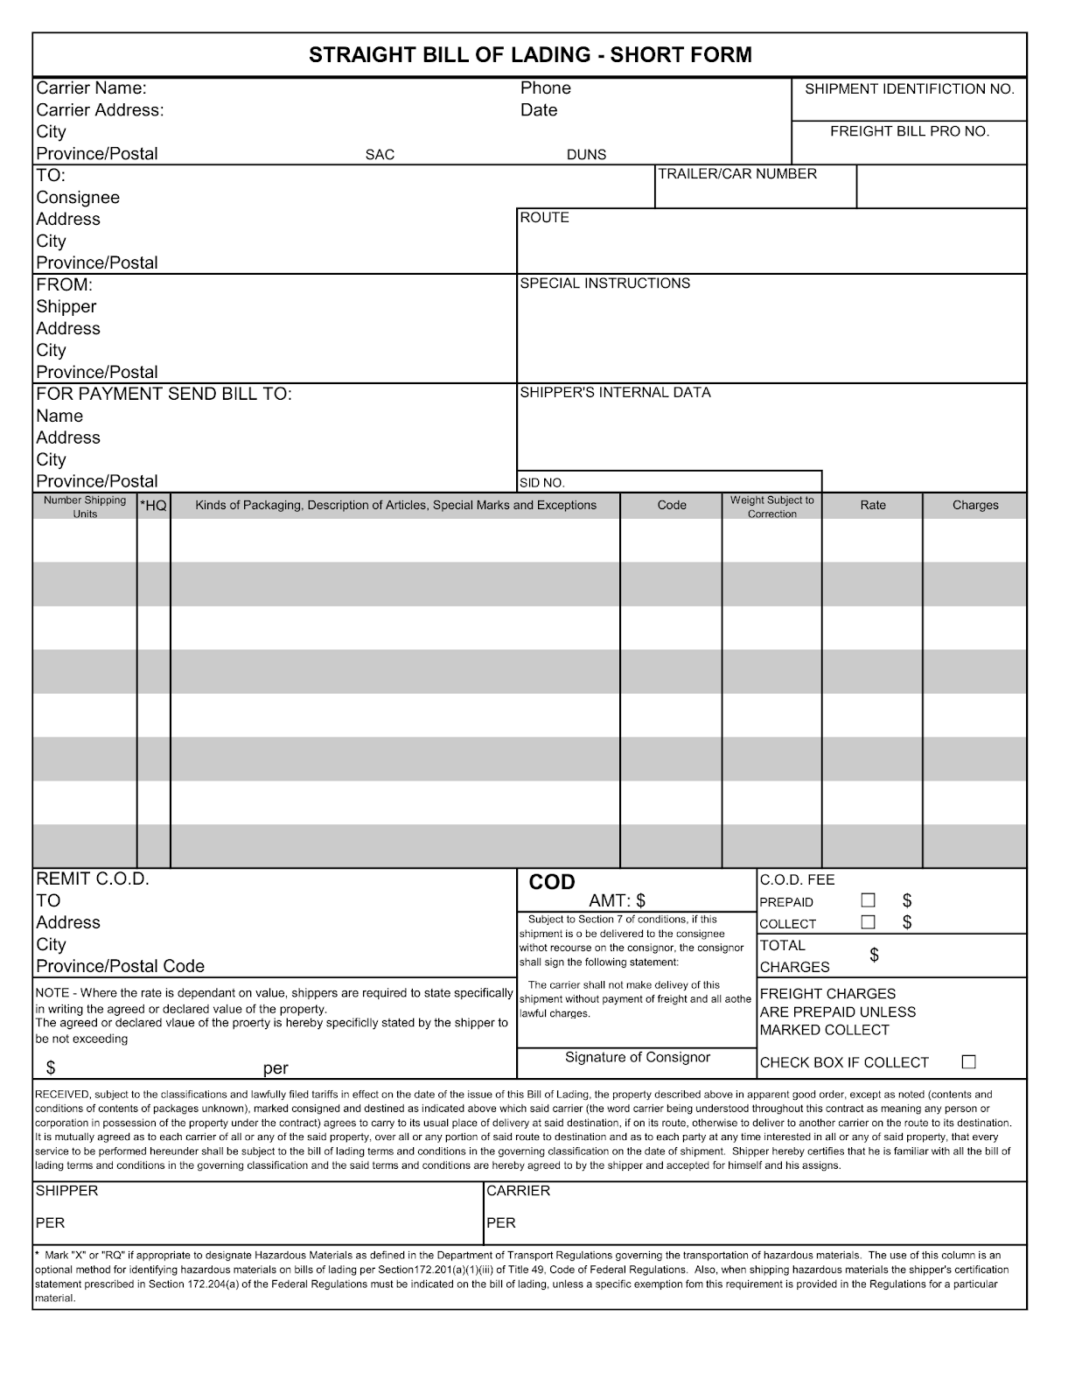 Bill of Lading Template by CanadaCustoms